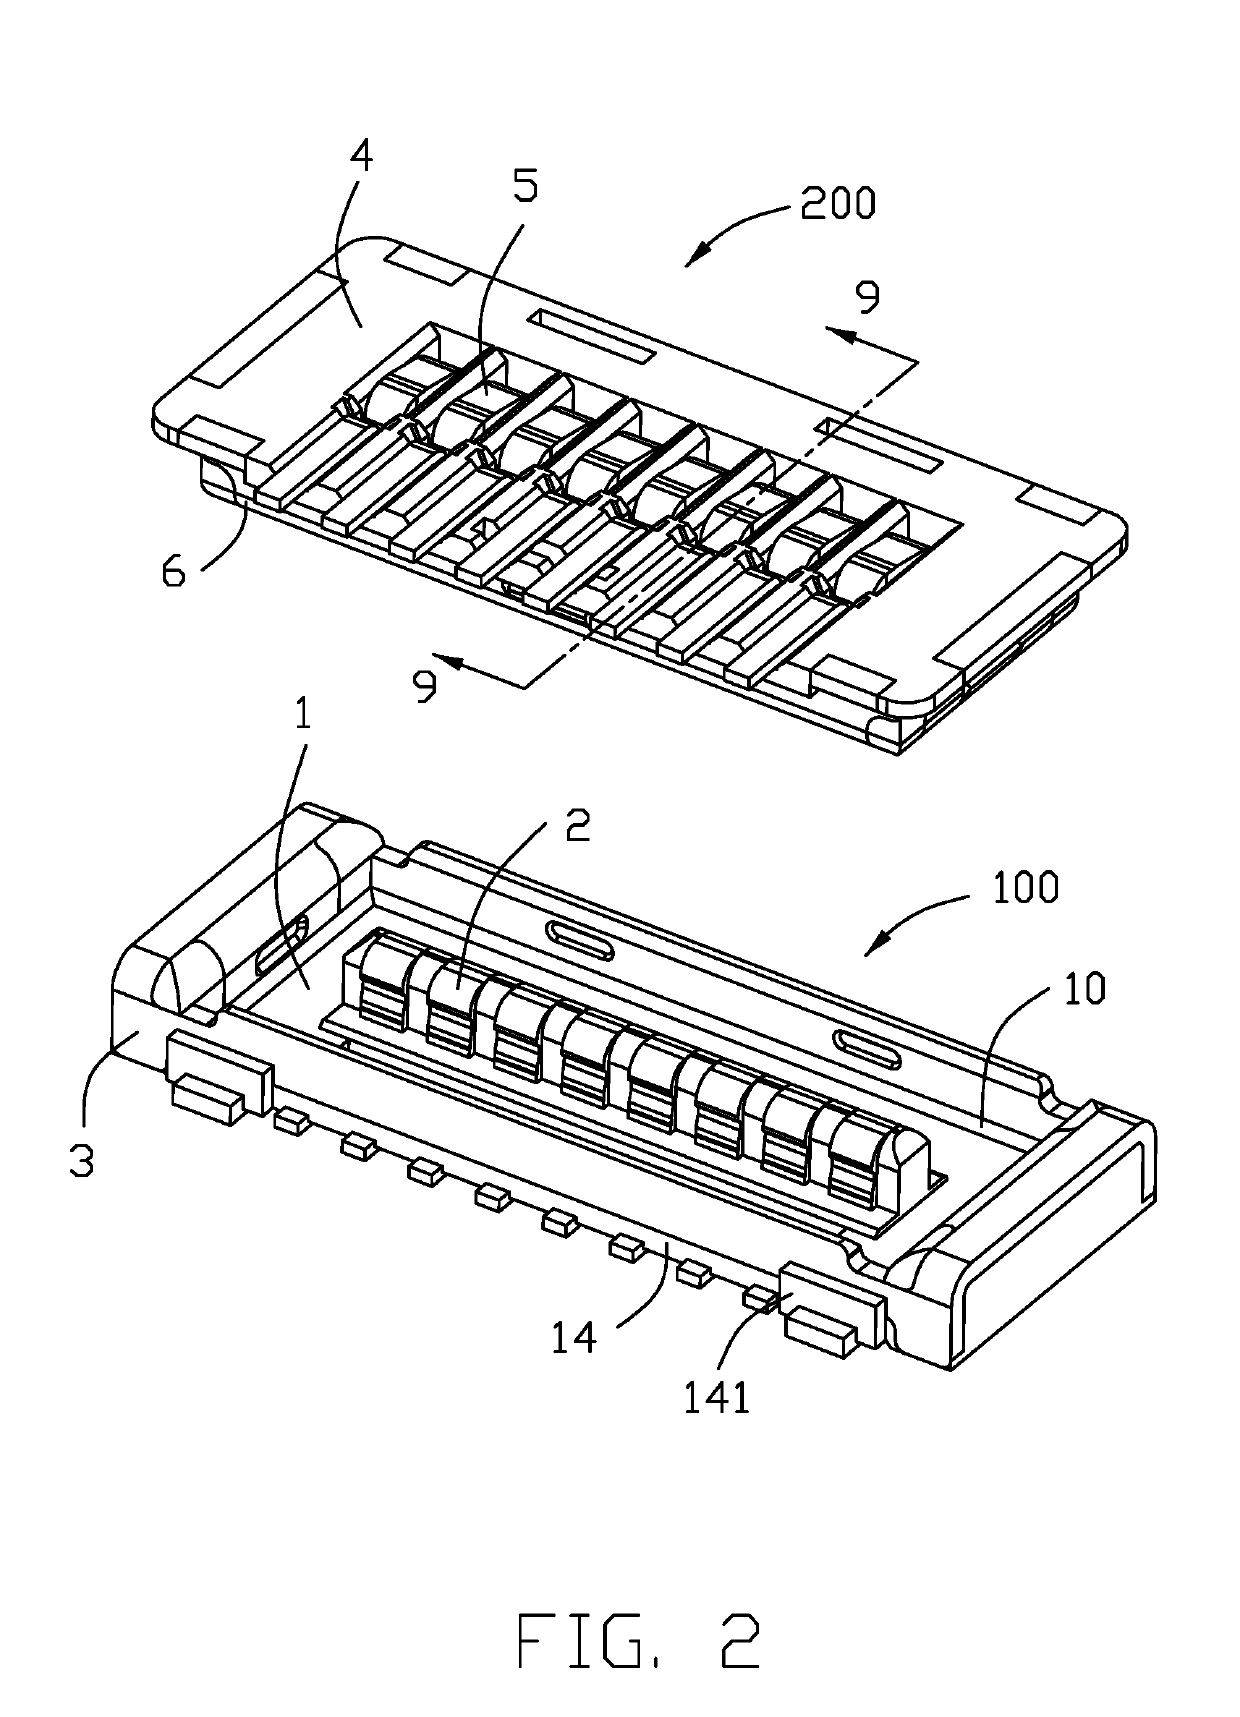 Electrical connector having an improved isolation block